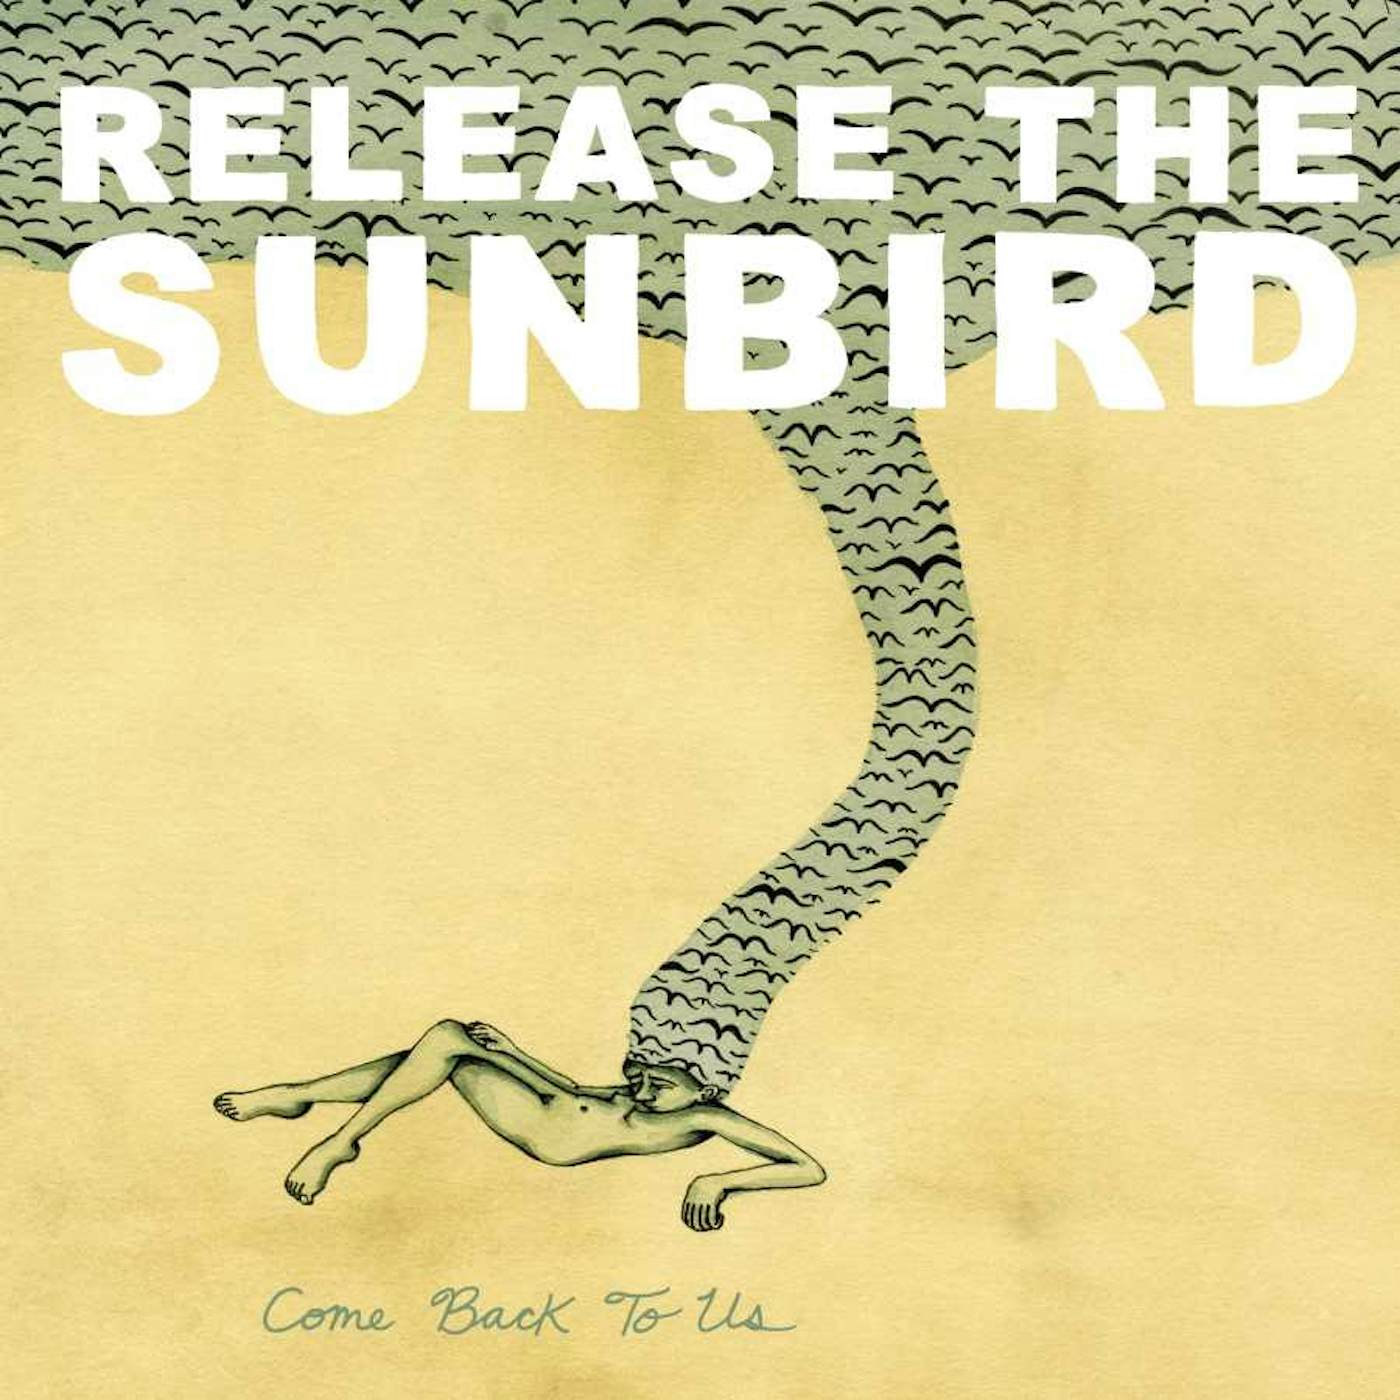 Release The Sunbird Come Back To Us Vinyl Record